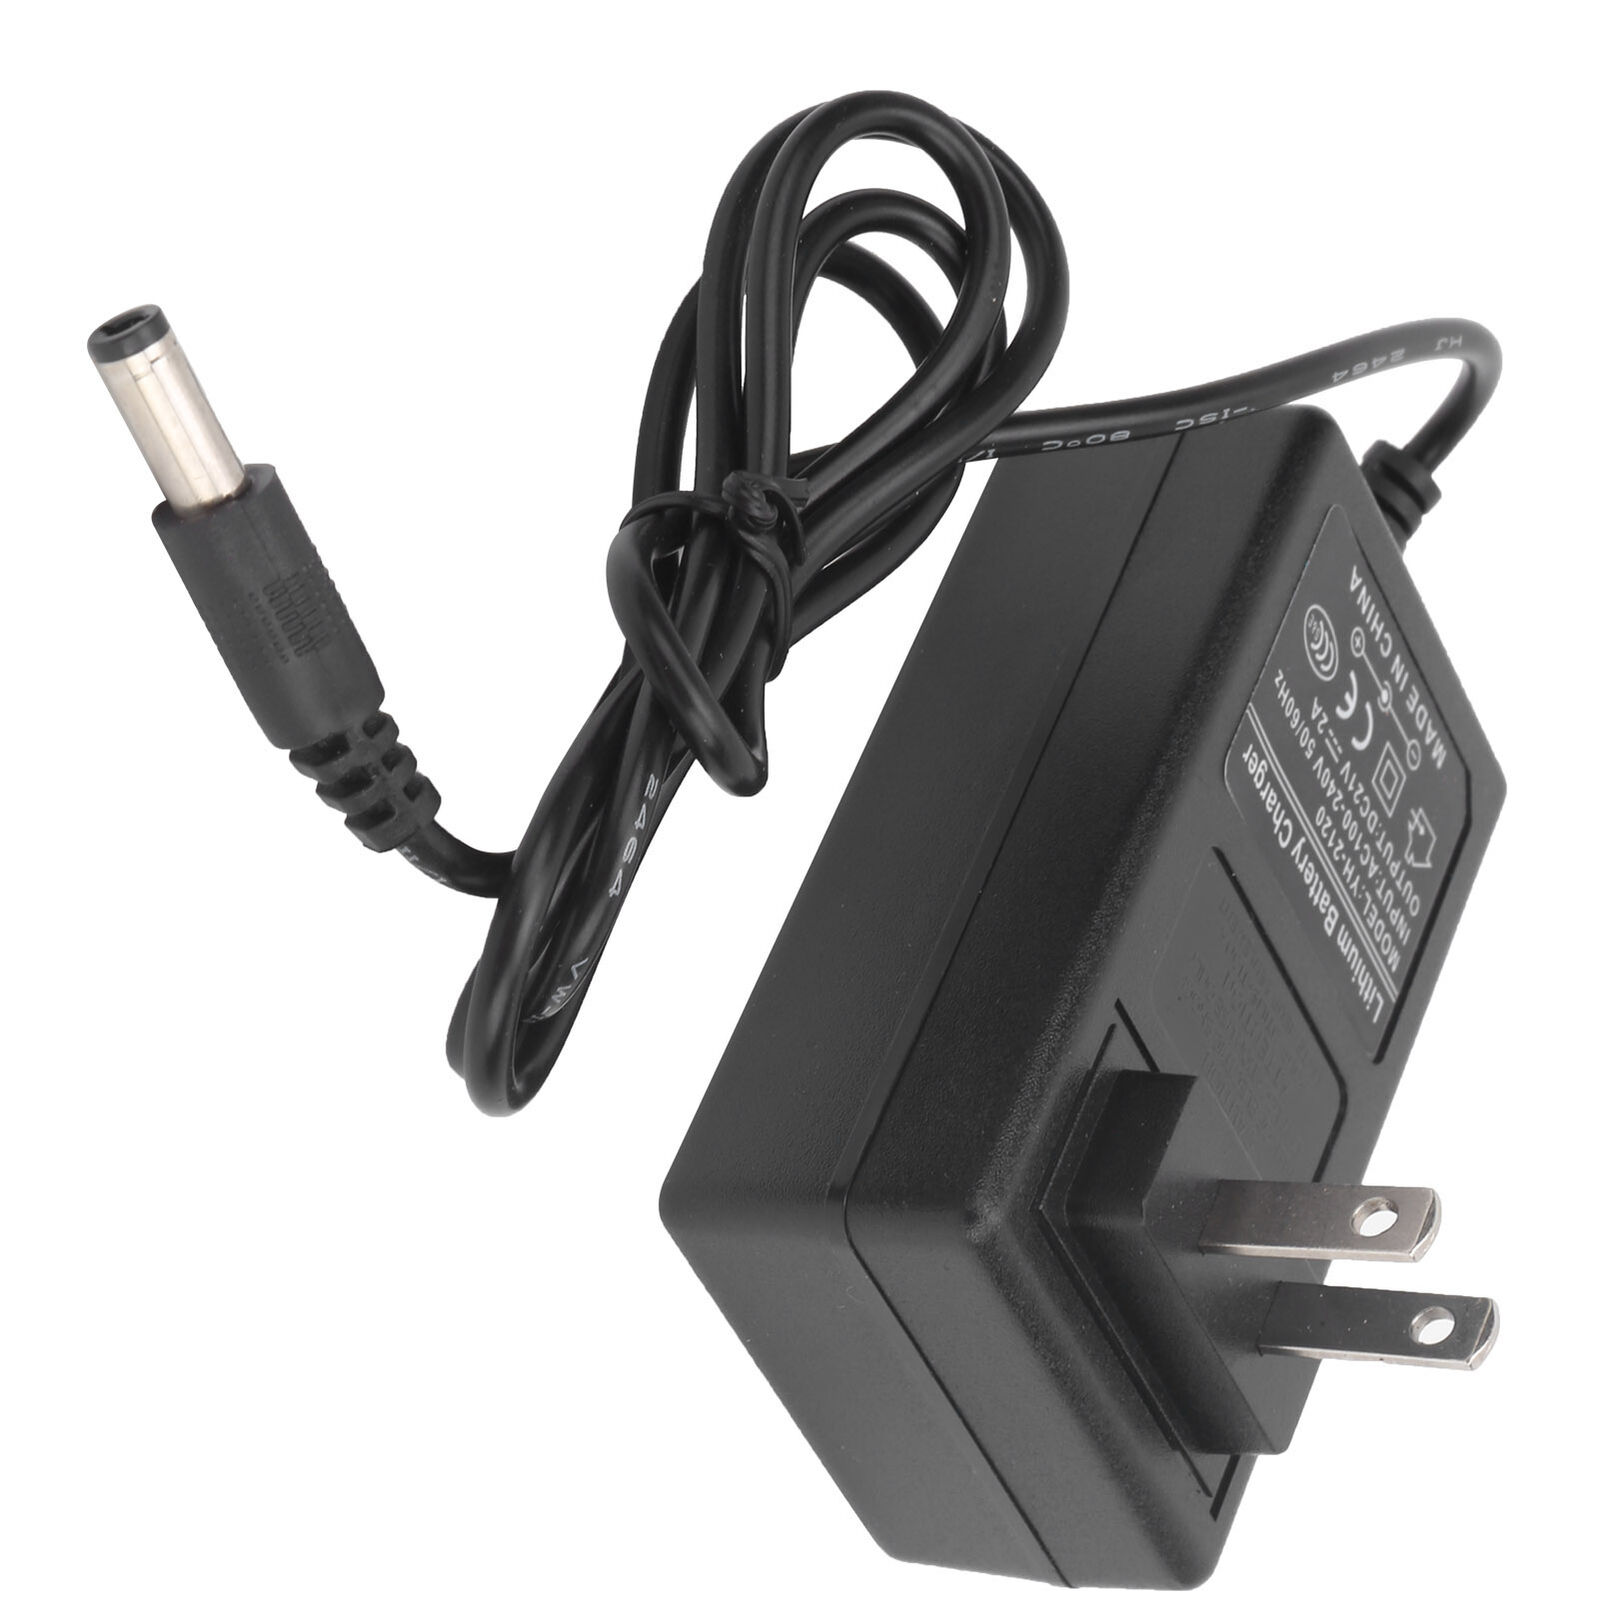 *Brand NEW*Remington HK28U-3.6-100 For PG-200 PG-250 PG-350 AC Adapter Power Supply Charger